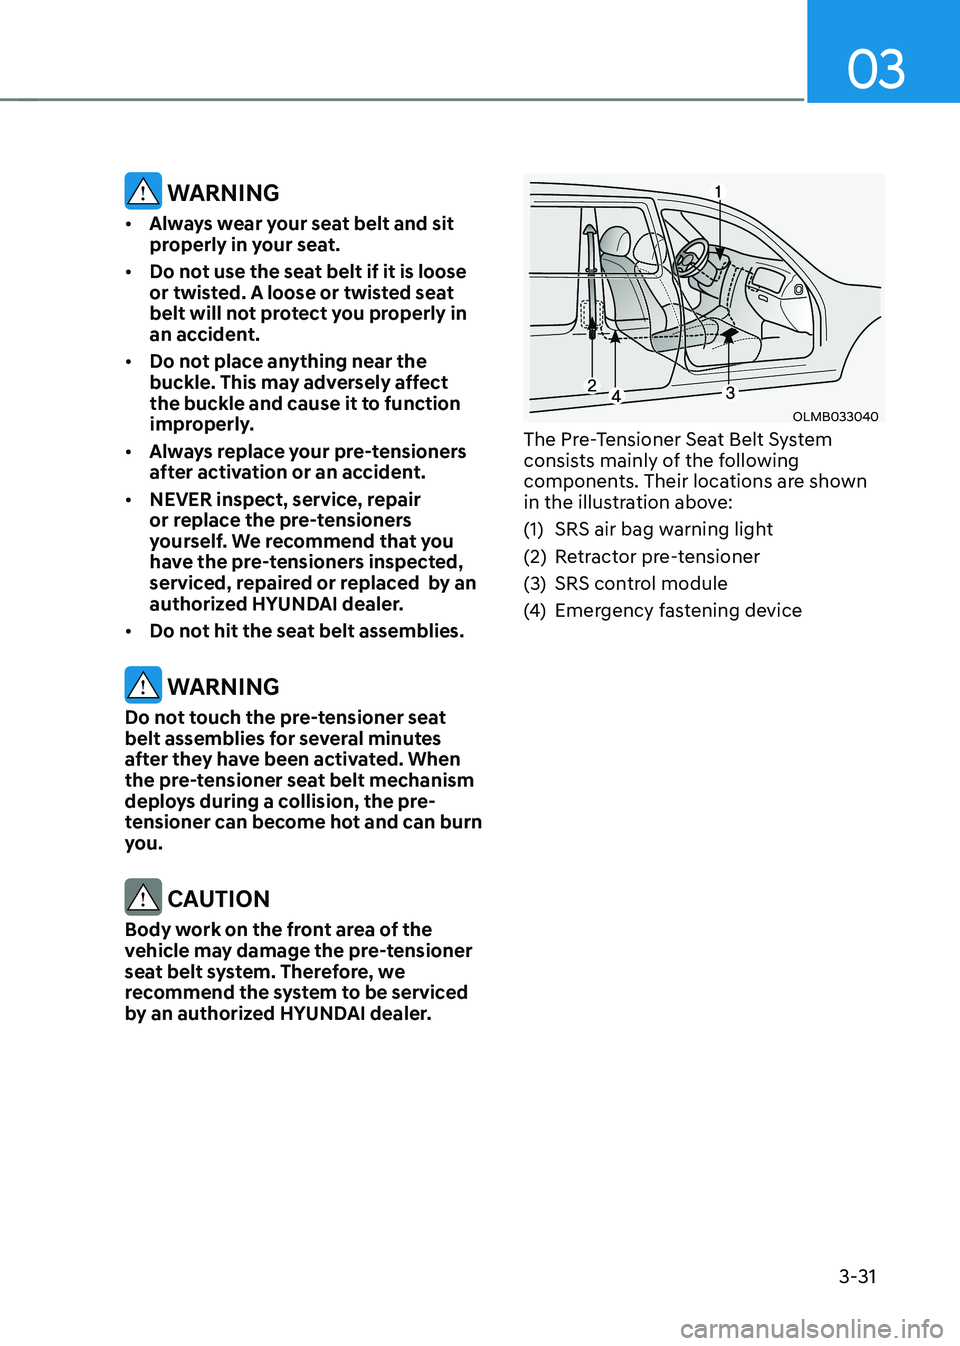 HYUNDAI TUCSON 2023  Owners Manual 03
3-31
 WARNING
•	Always wear your seat belt and sit 
properly in your seat.
•	 Do not use the seat belt if it is loose 
or twisted. A loose or twisted seat 
belt will not protect you properly in